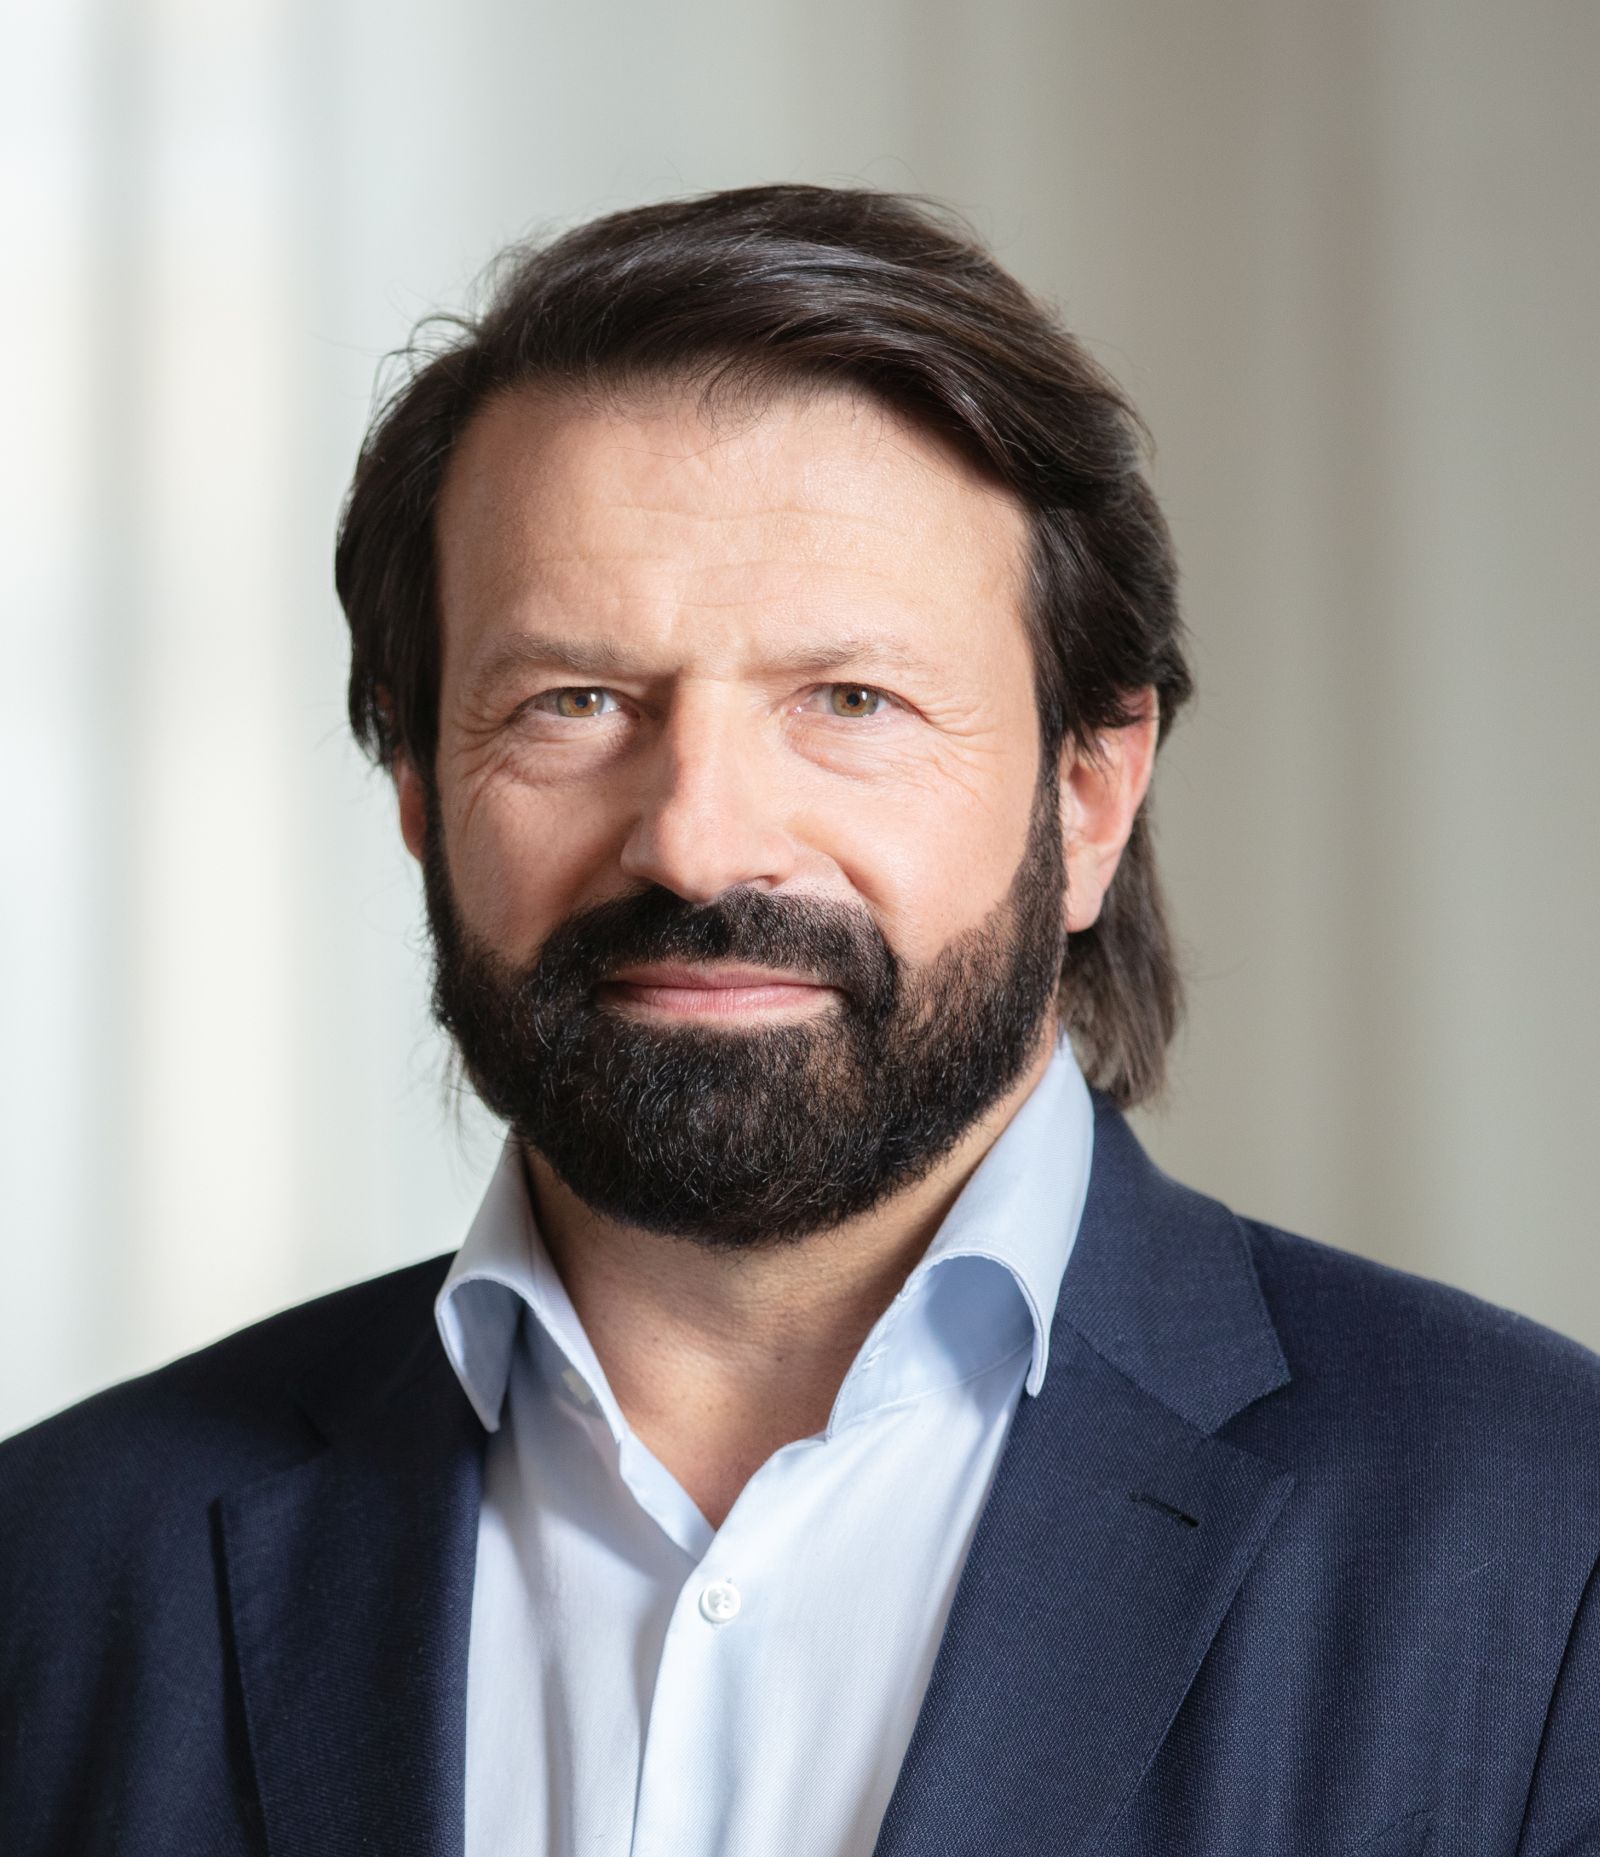 Christophe Gaussin is the Chief Executive Officer of the hydrogen powered vehicle manufacturer Gaussin Group 